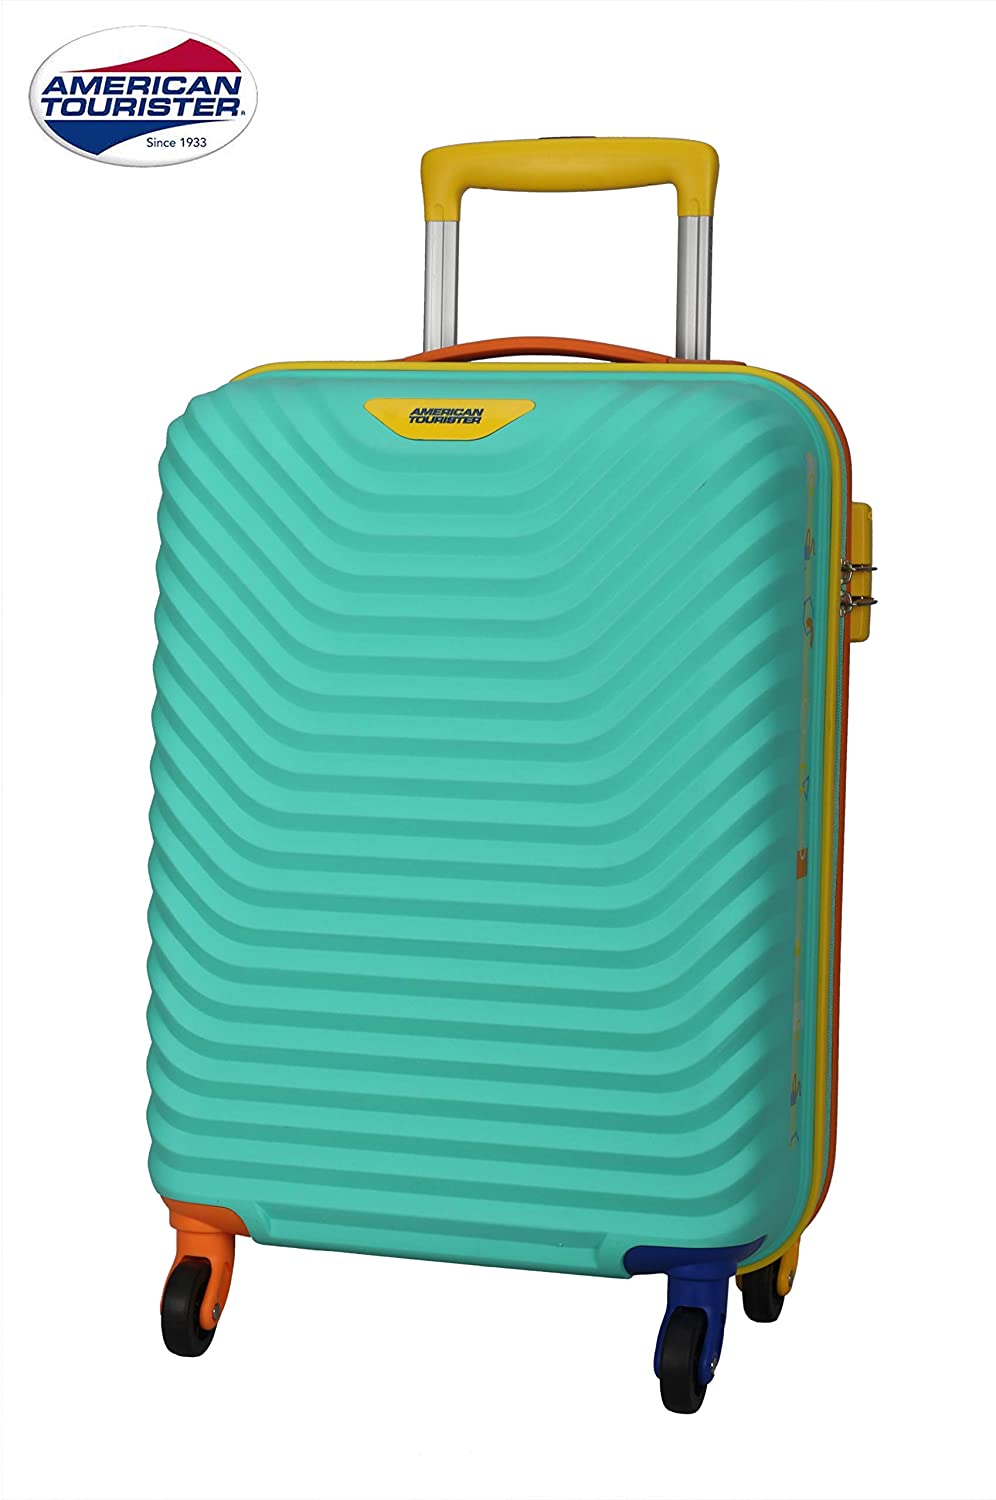 Cabin Luggage Bags Under 1500 Top Choices For Frequent Travelers   Times  of India